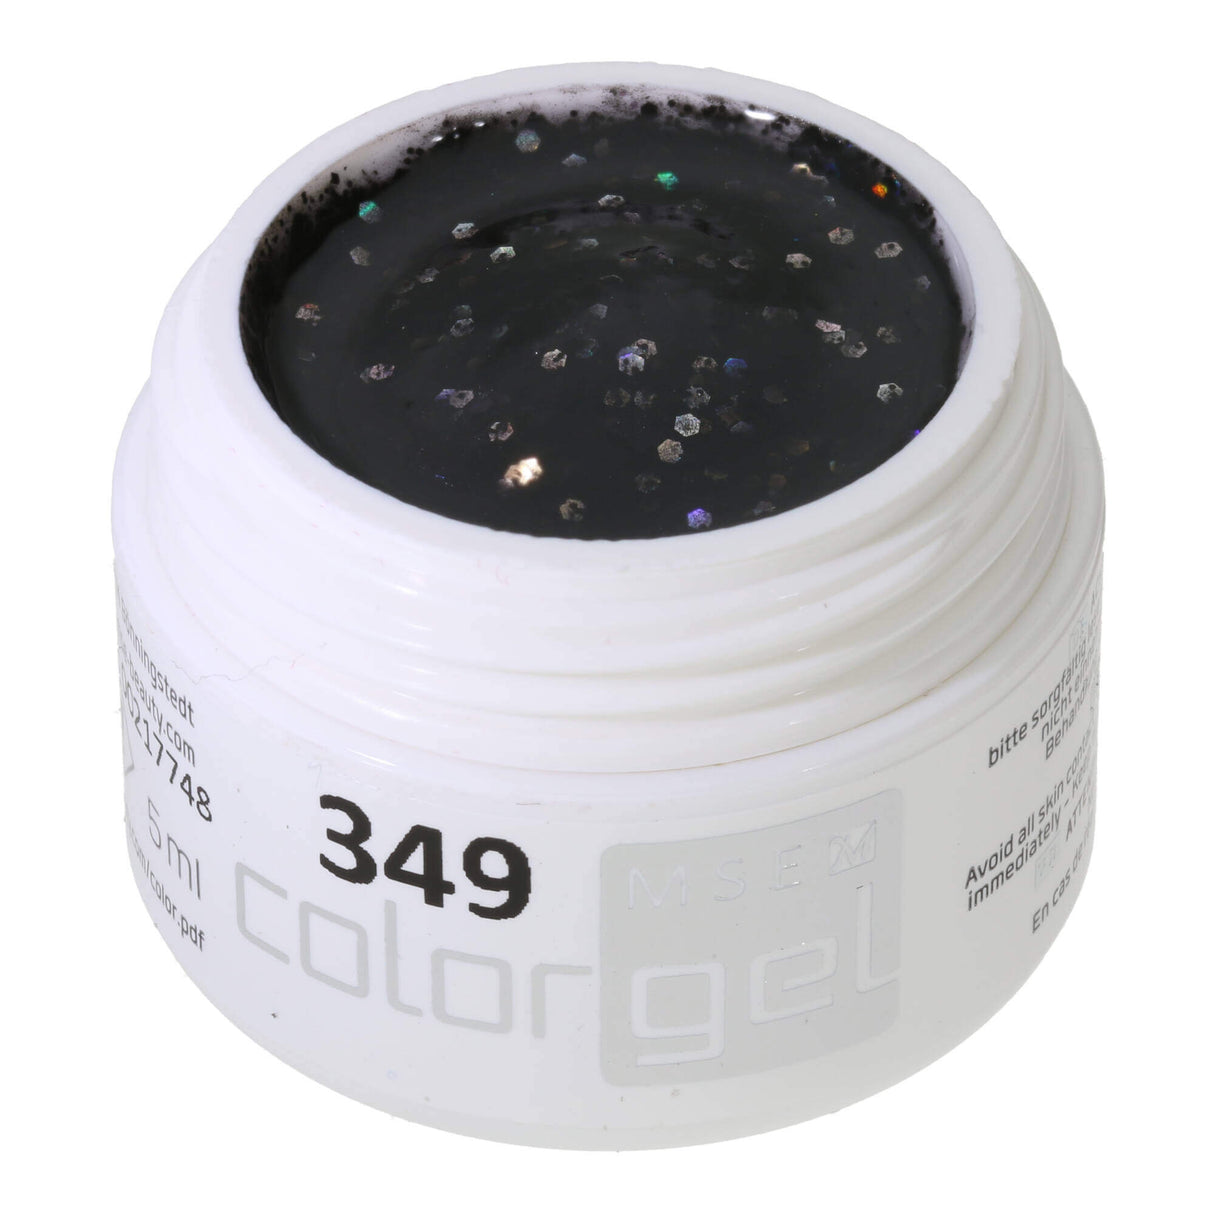 # 349 Premium-GLITTER Color Gel 5ml Mixture of black and silver glitter with a rainbow effect